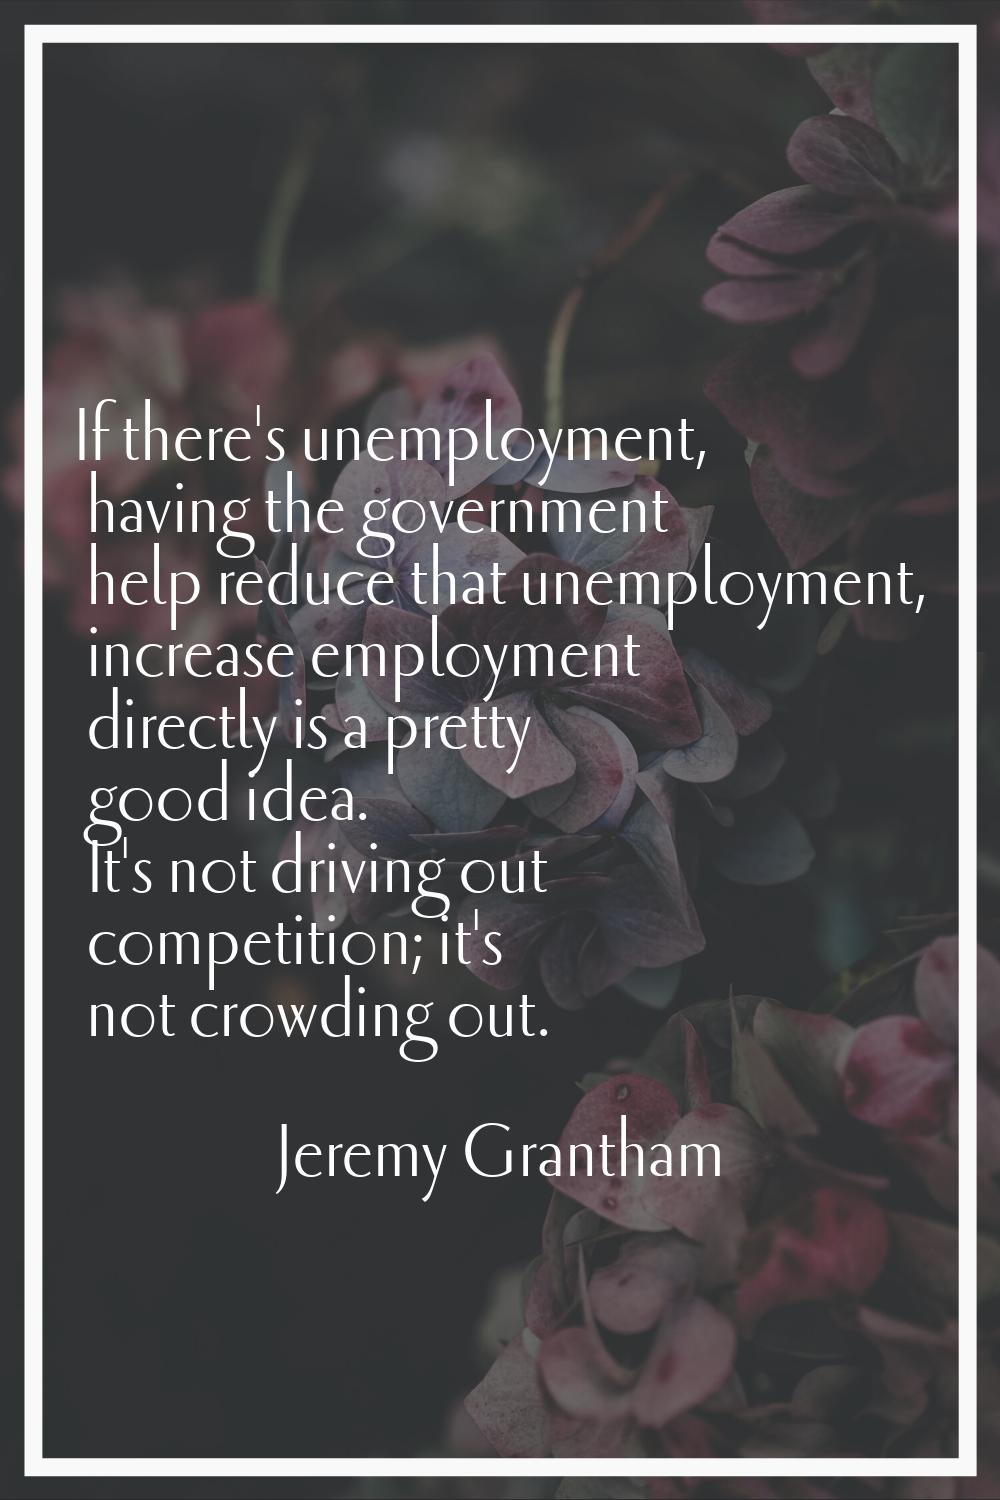 If there's unemployment, having the government help reduce that unemployment, increase employment d